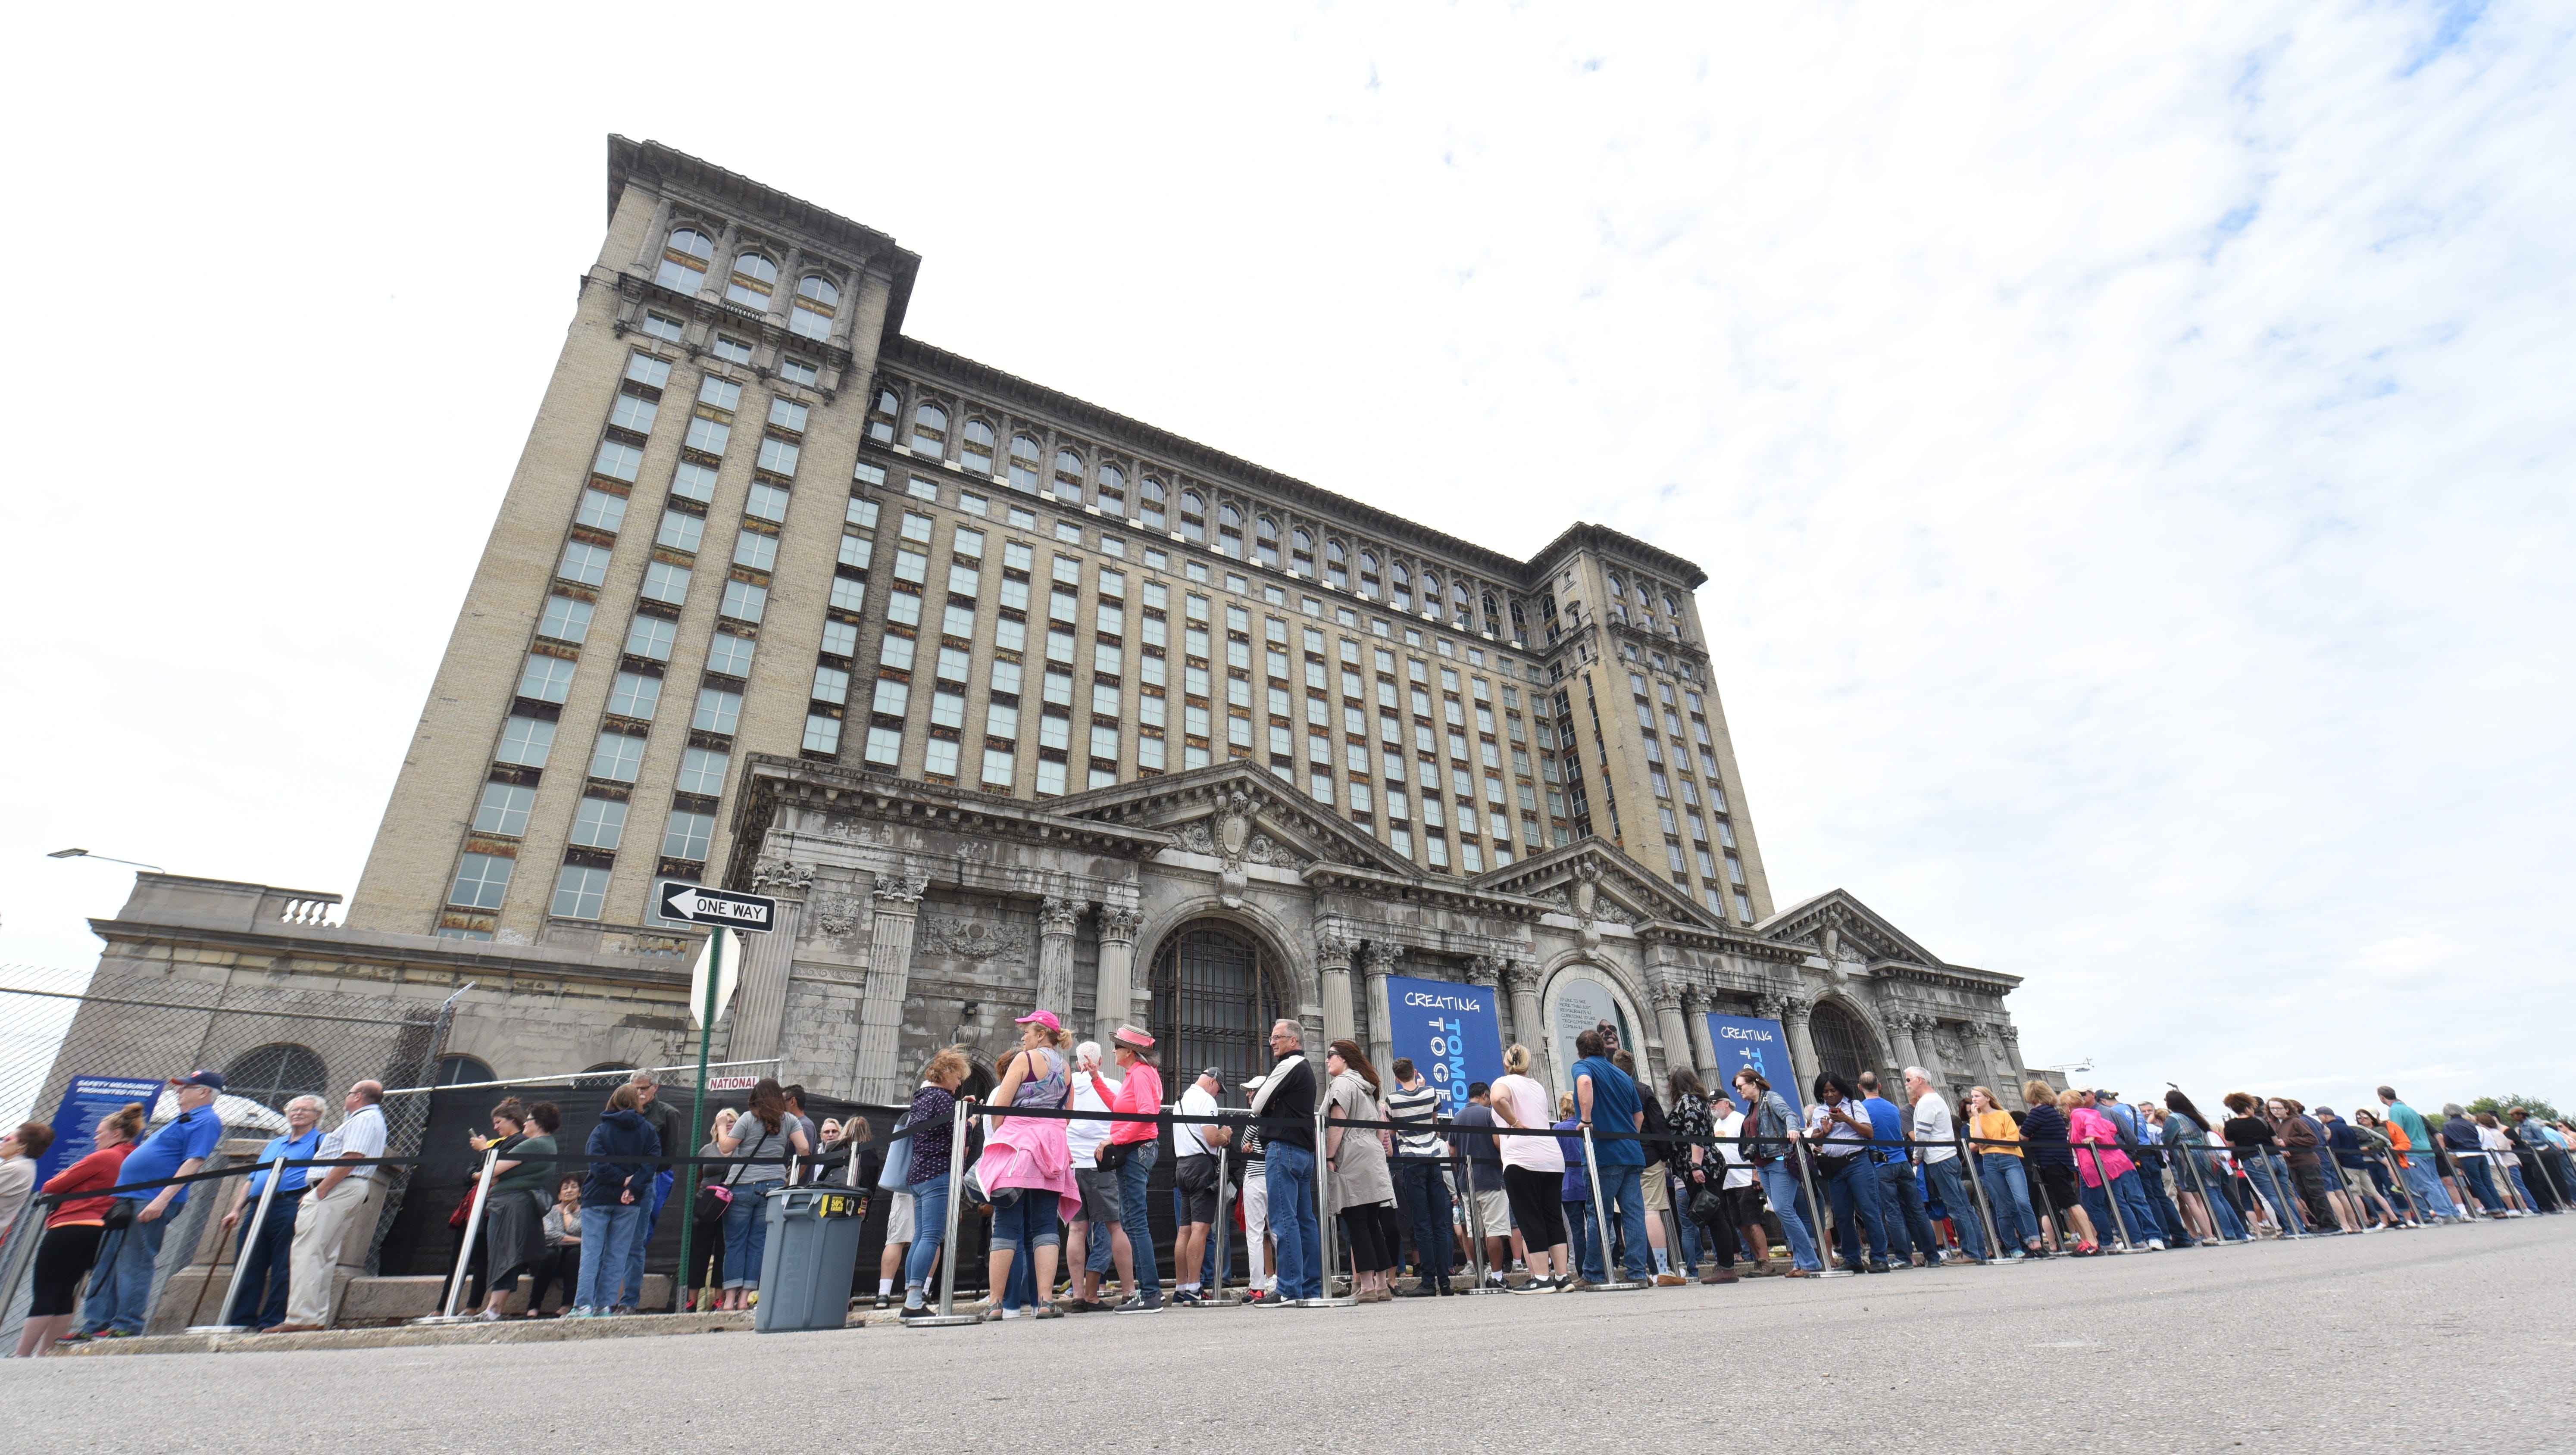 Hundreds of people wait in line outside the Michigan Central Train Depot as Ford Motor Company hosts an open house at the Detroit landmark on Friday, June 22, 2018..